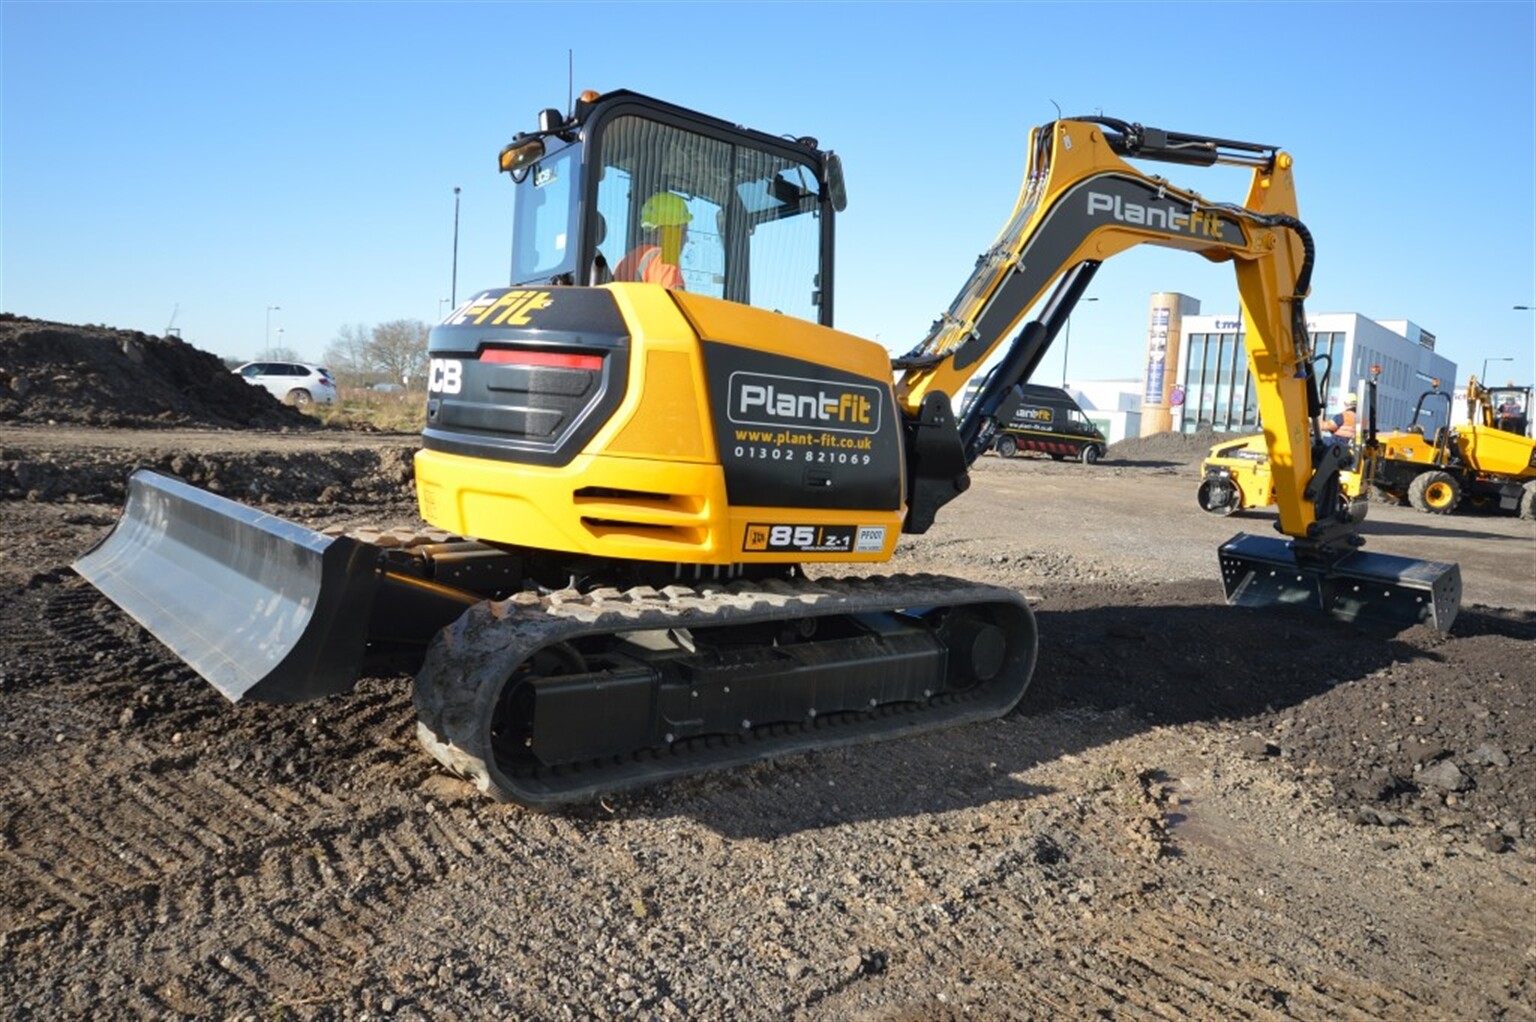 JCB kit fits the bill for Plant-Fit